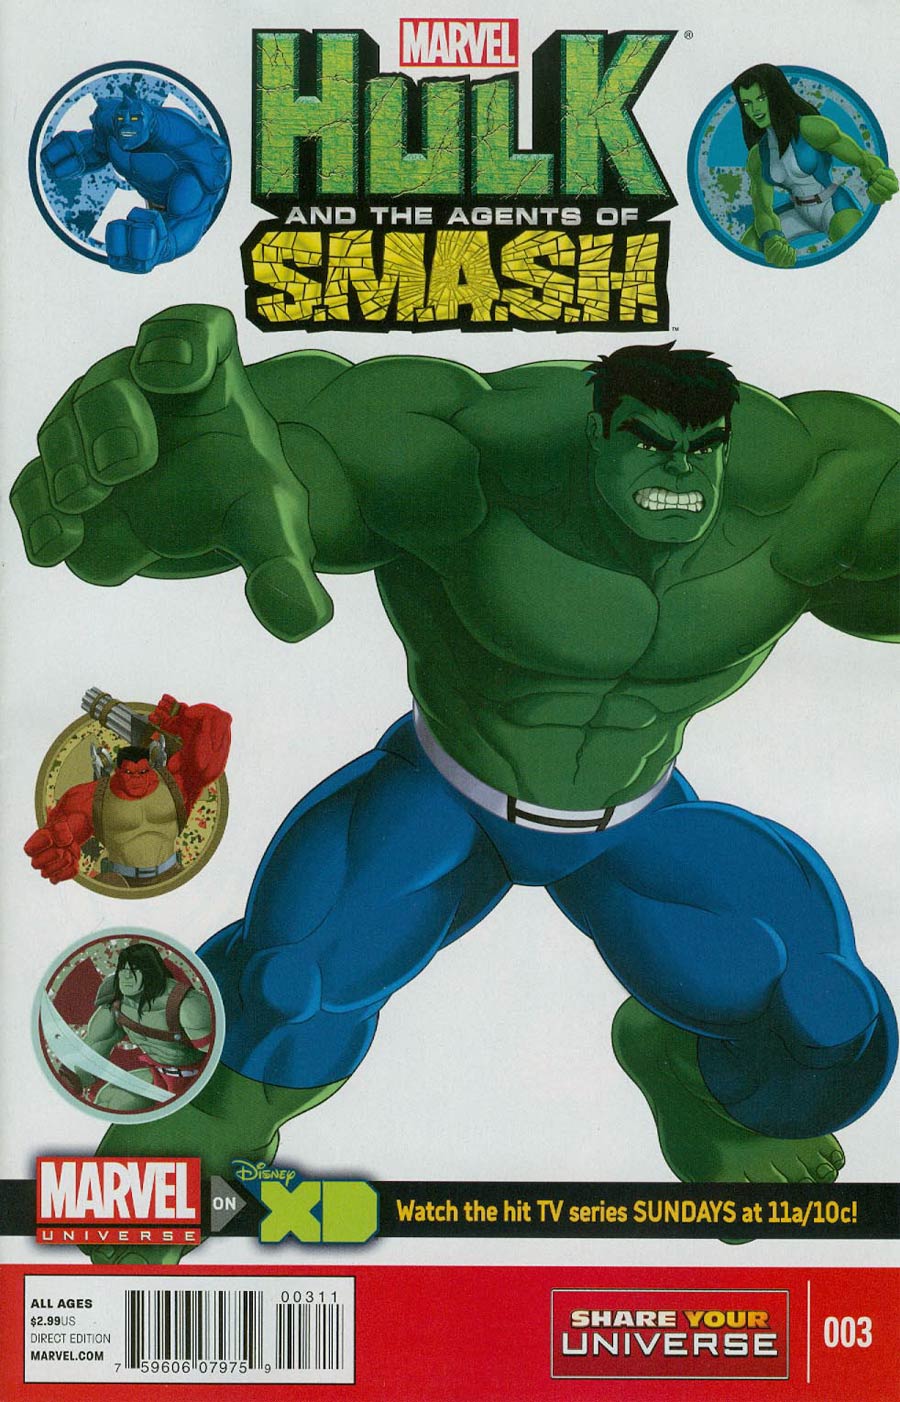 Marvel Universe Hulk And The Agents Of S.M.A.S.H. #3